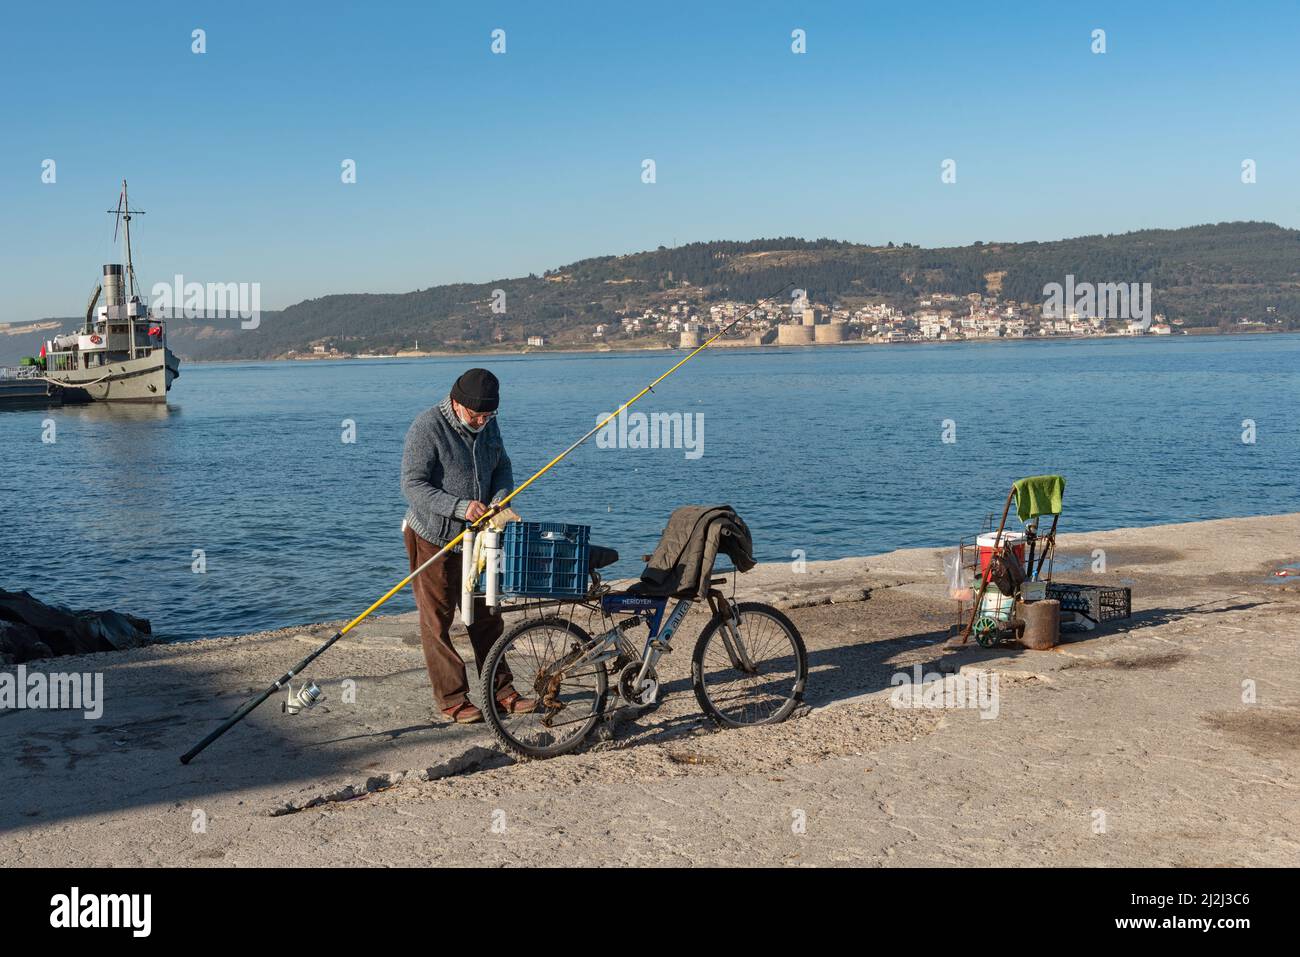 Canakkale, Turkey. February 18th 2022 A Turkish fisherman on the pier at Canakkale, with the Dardanelles Straight, Gallipoli Peninsula and Kilitbaher Stock Photo